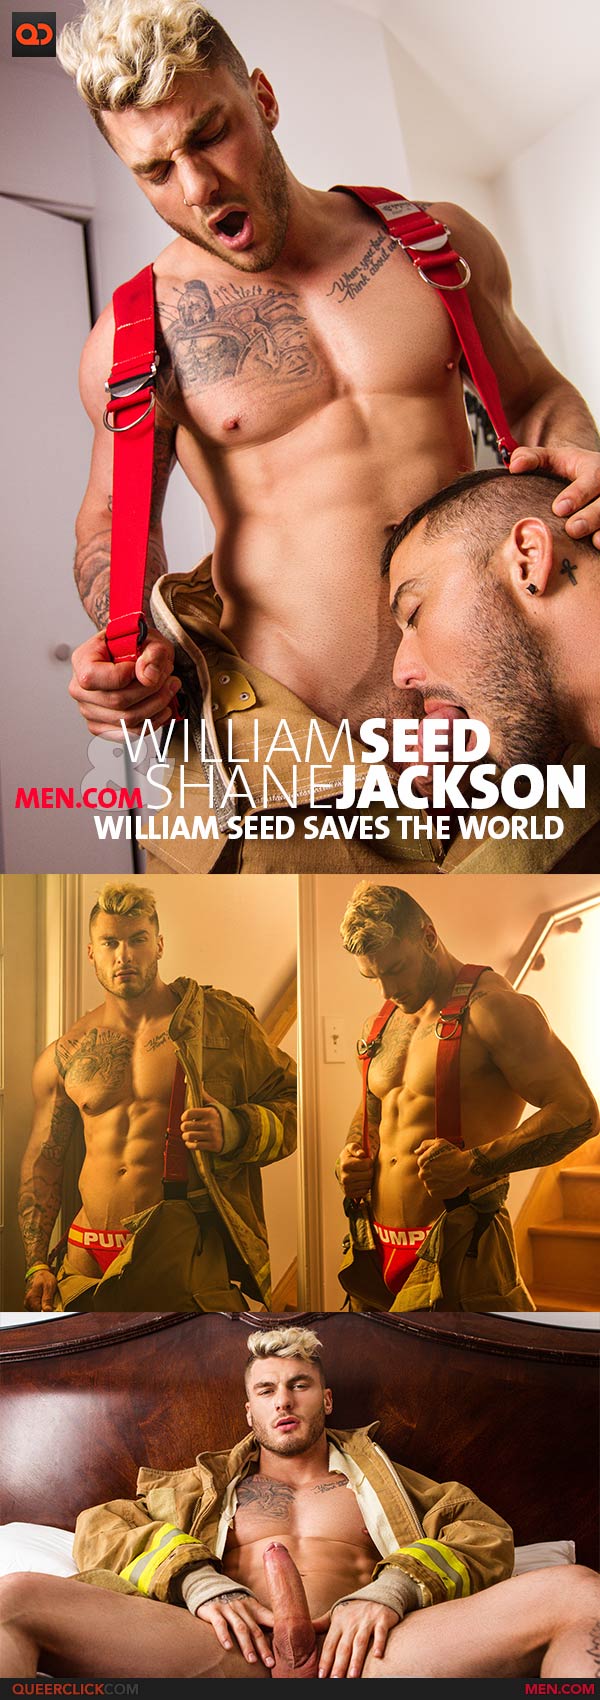 Men.com: William Seed Saves The World - William Seed and Shane Jackson